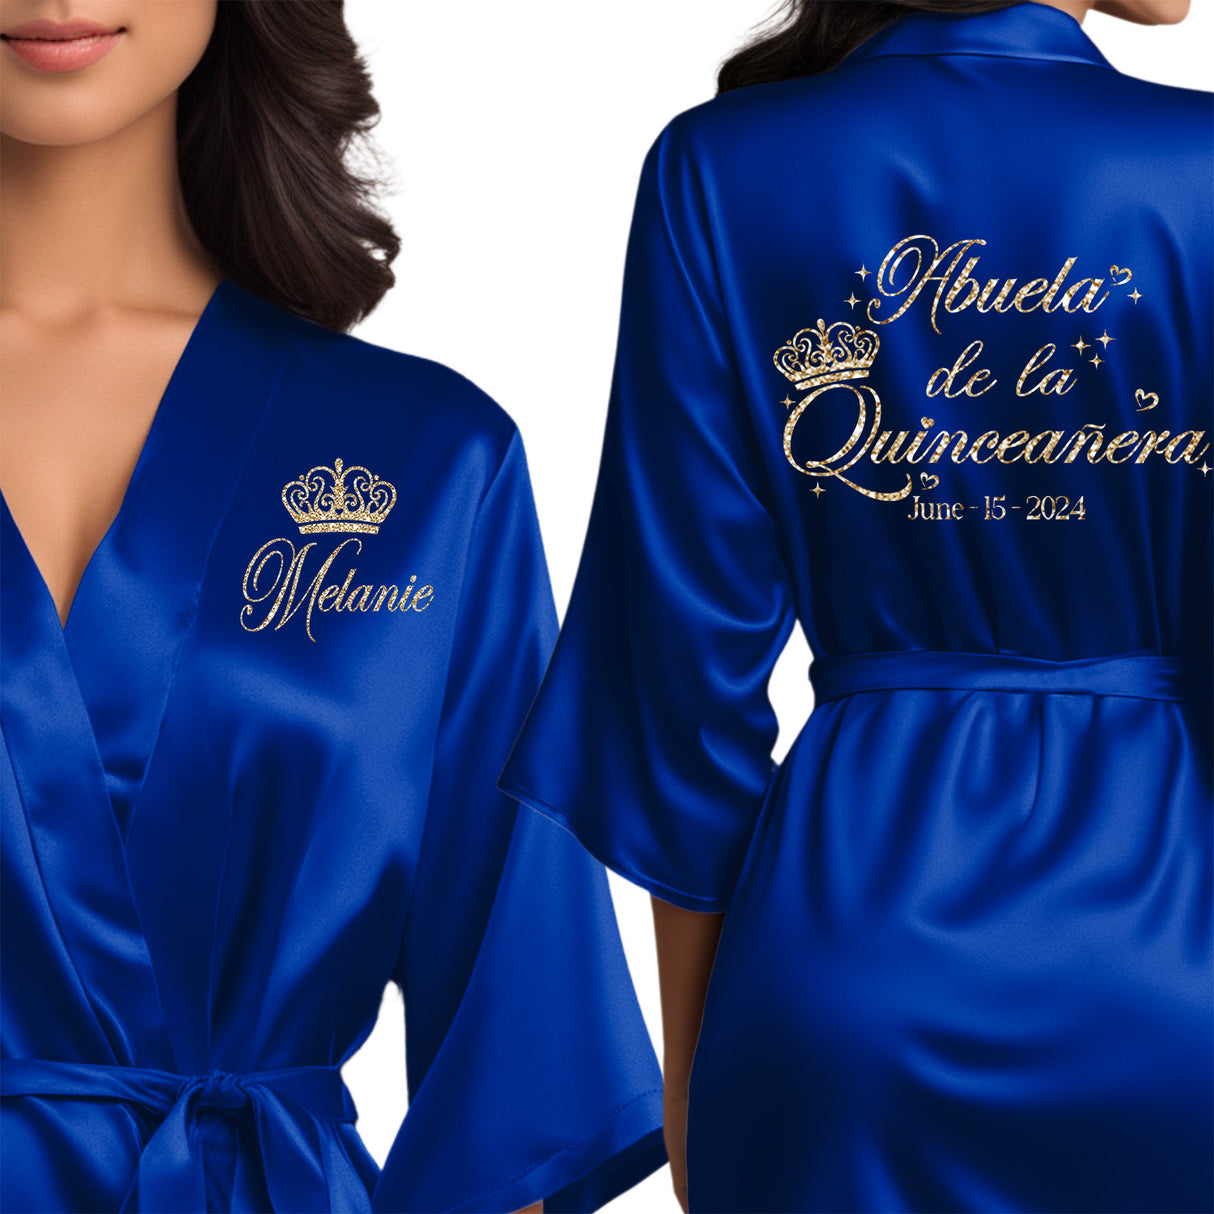 Front and back personalized satin royal blue quinceanera robes at knee length. Abuela de la quinceanera getting ready robes.